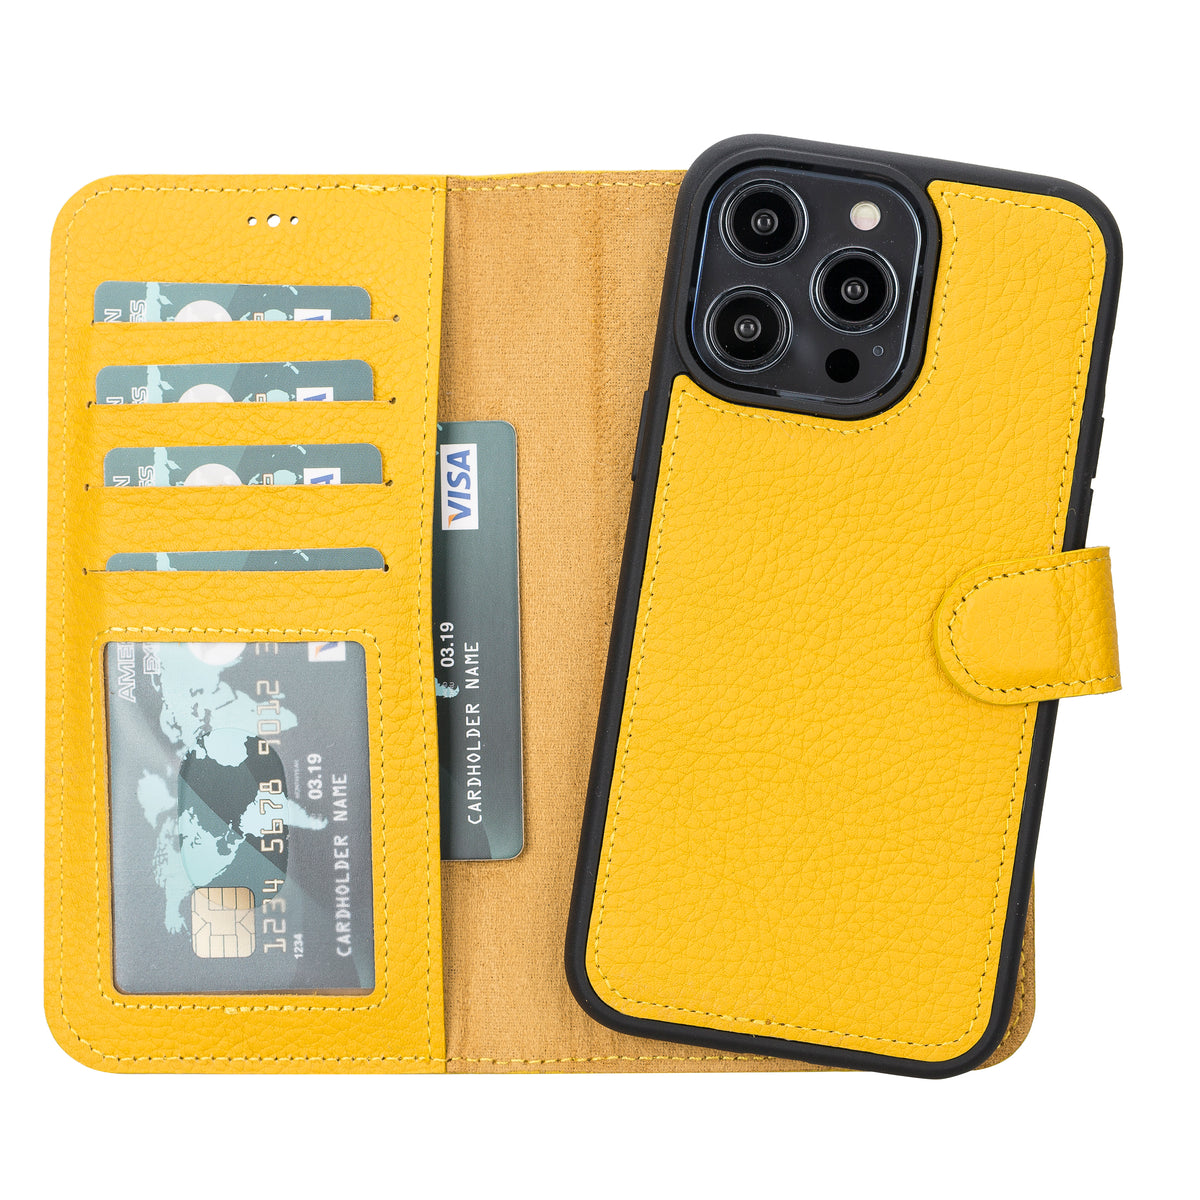 Wallet iPhone 13 Pro Max leather case with MagSafe